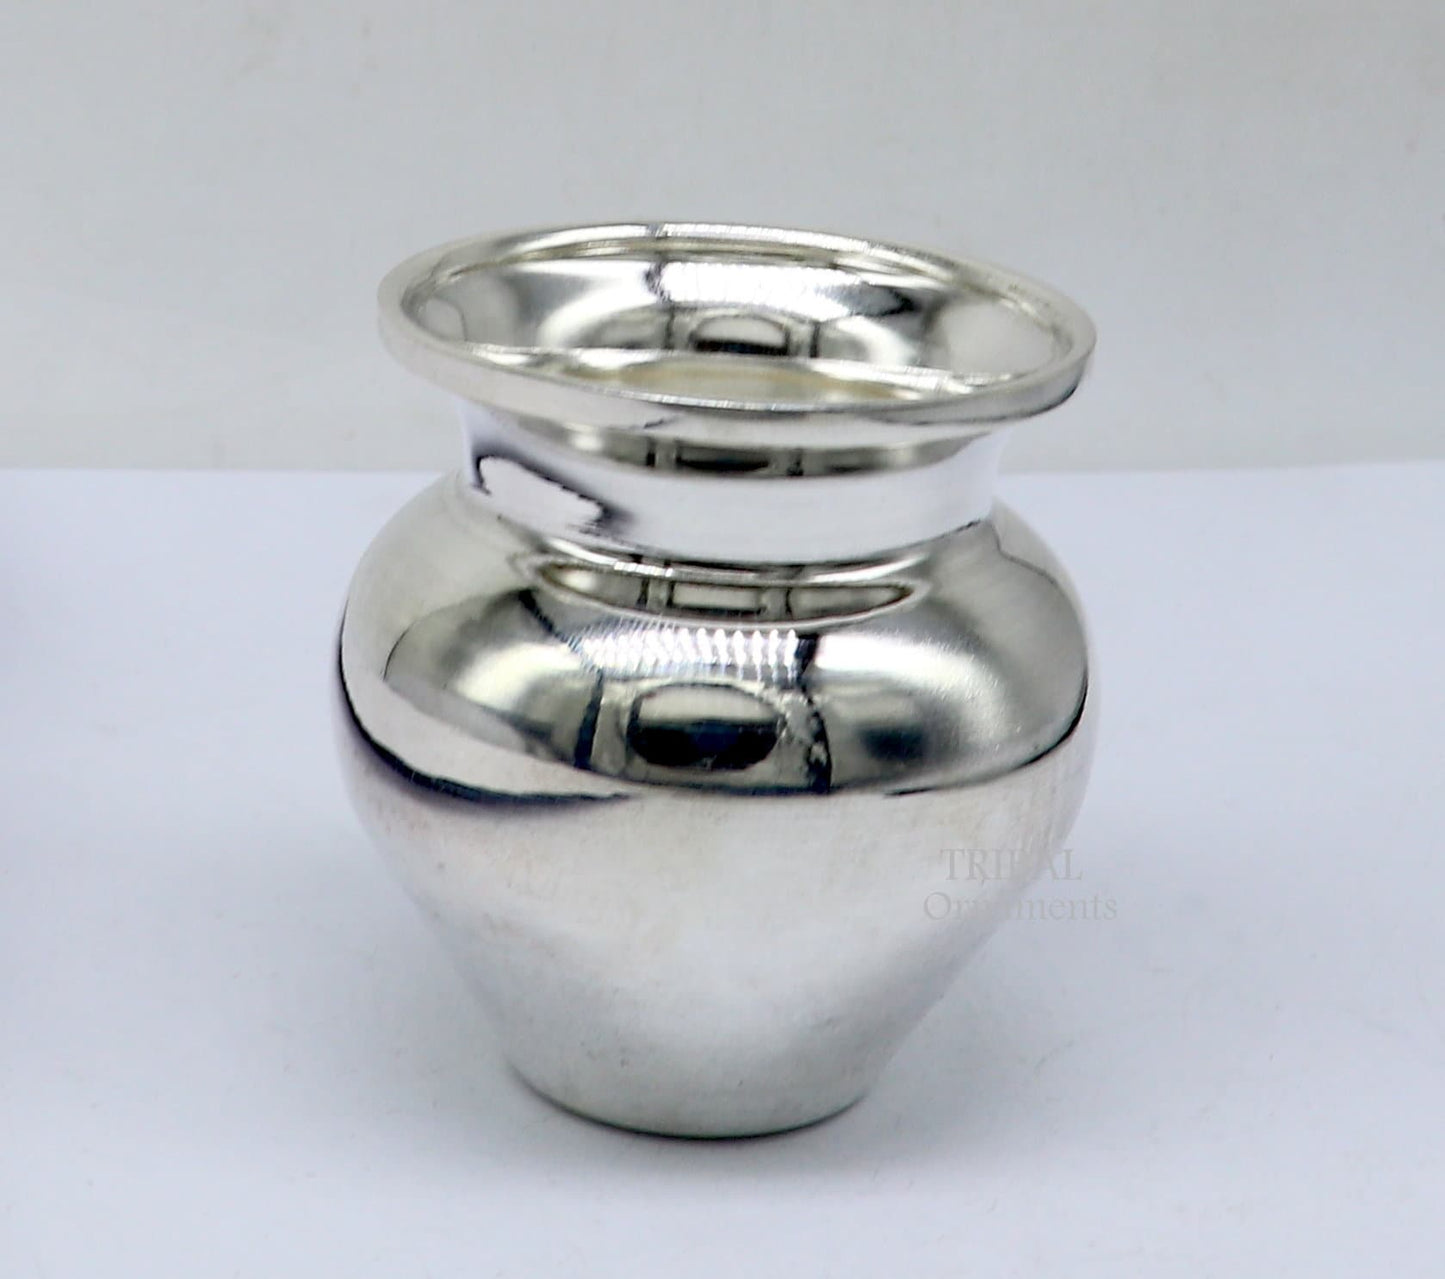 Pure 925 sterling silver handmade plain small Kalash or pot, unique special silver puja article, water or milk kalash pot india su1020 - TRIBAL ORNAMENTS